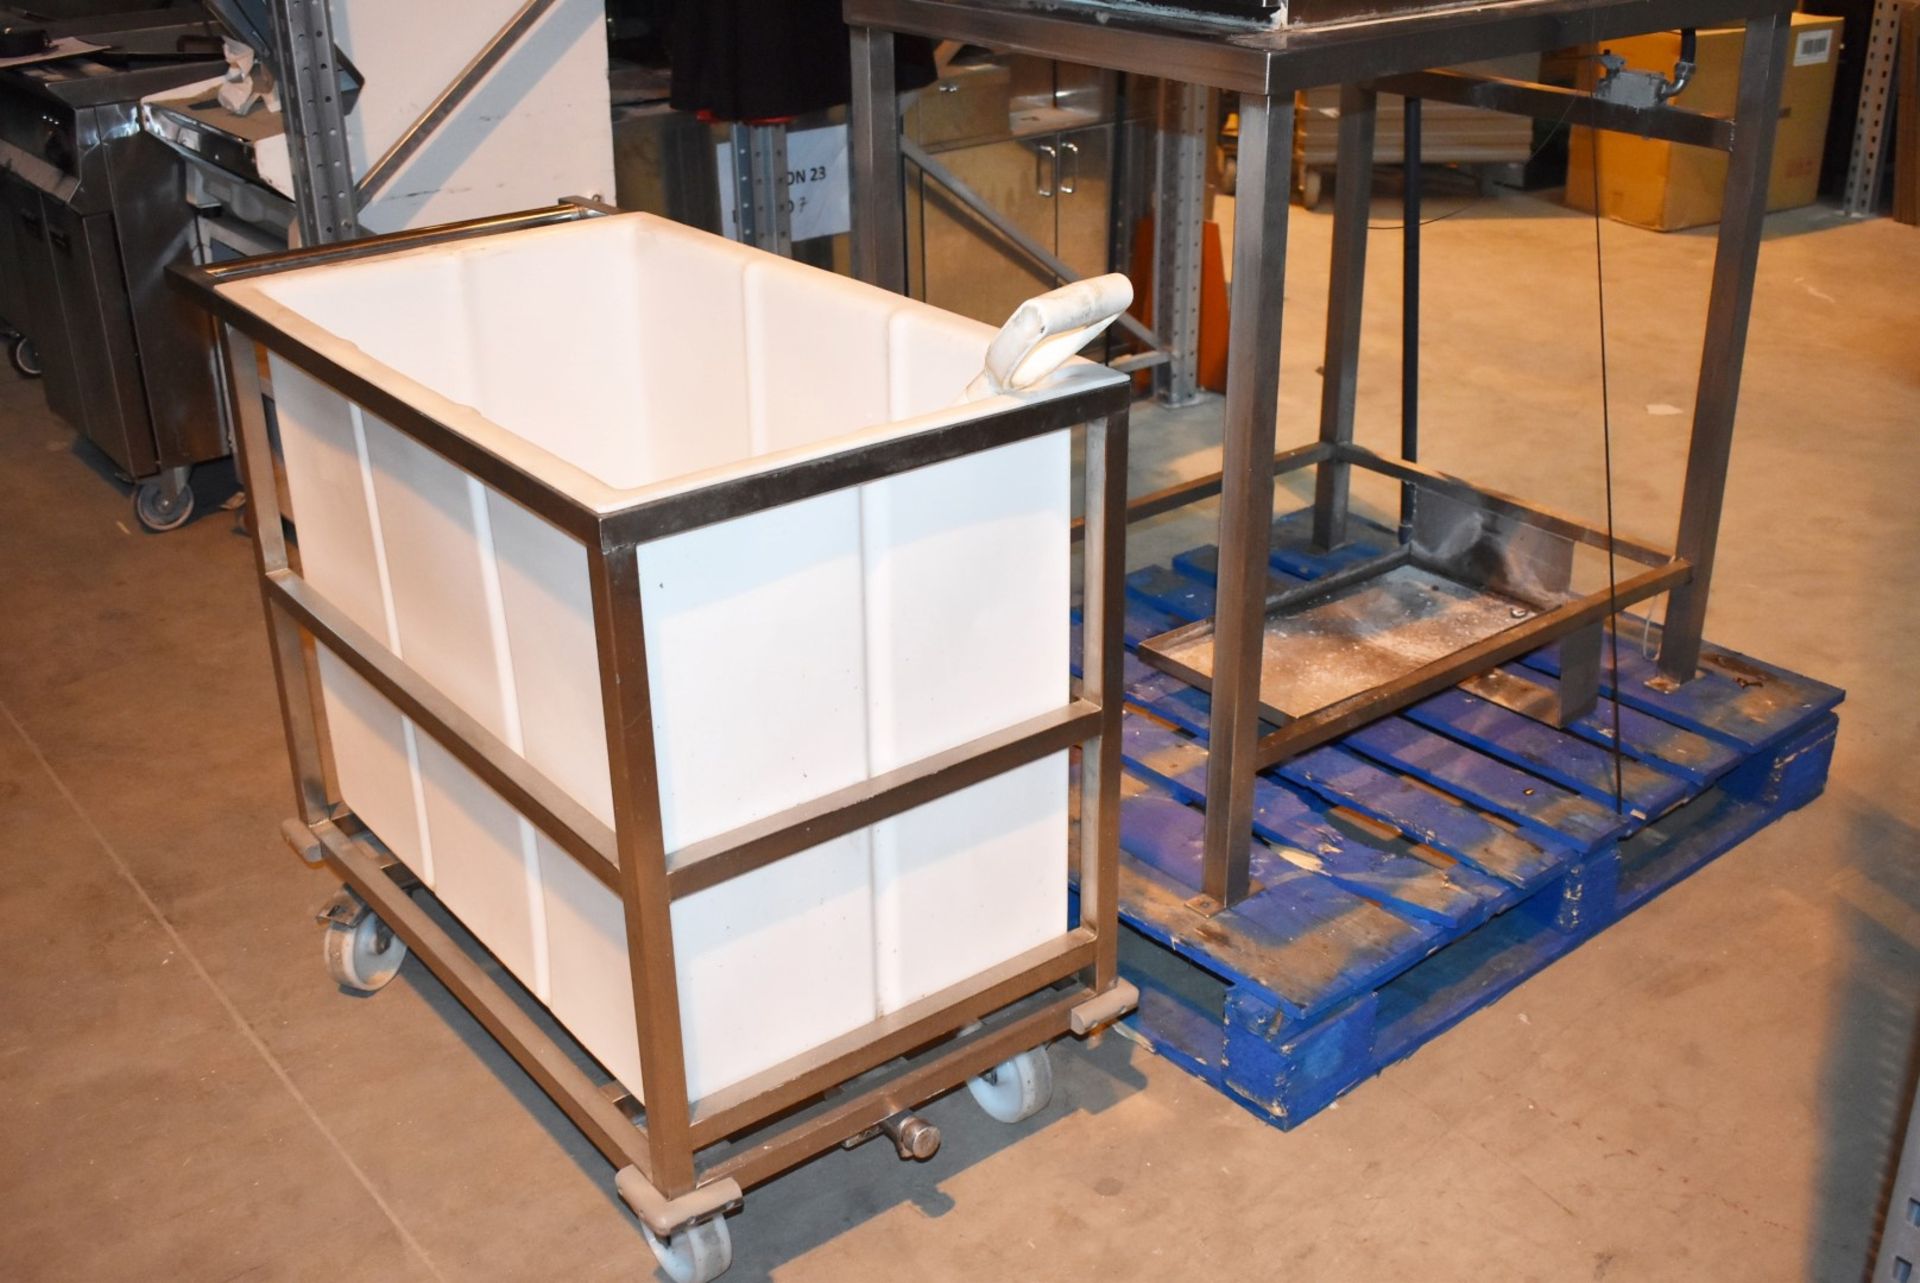 1 x Hoshizaki Modular Ice Flaker With Transport Ice Bin - 480kg/24hr - 240v - Recently Removed - Image 7 of 14